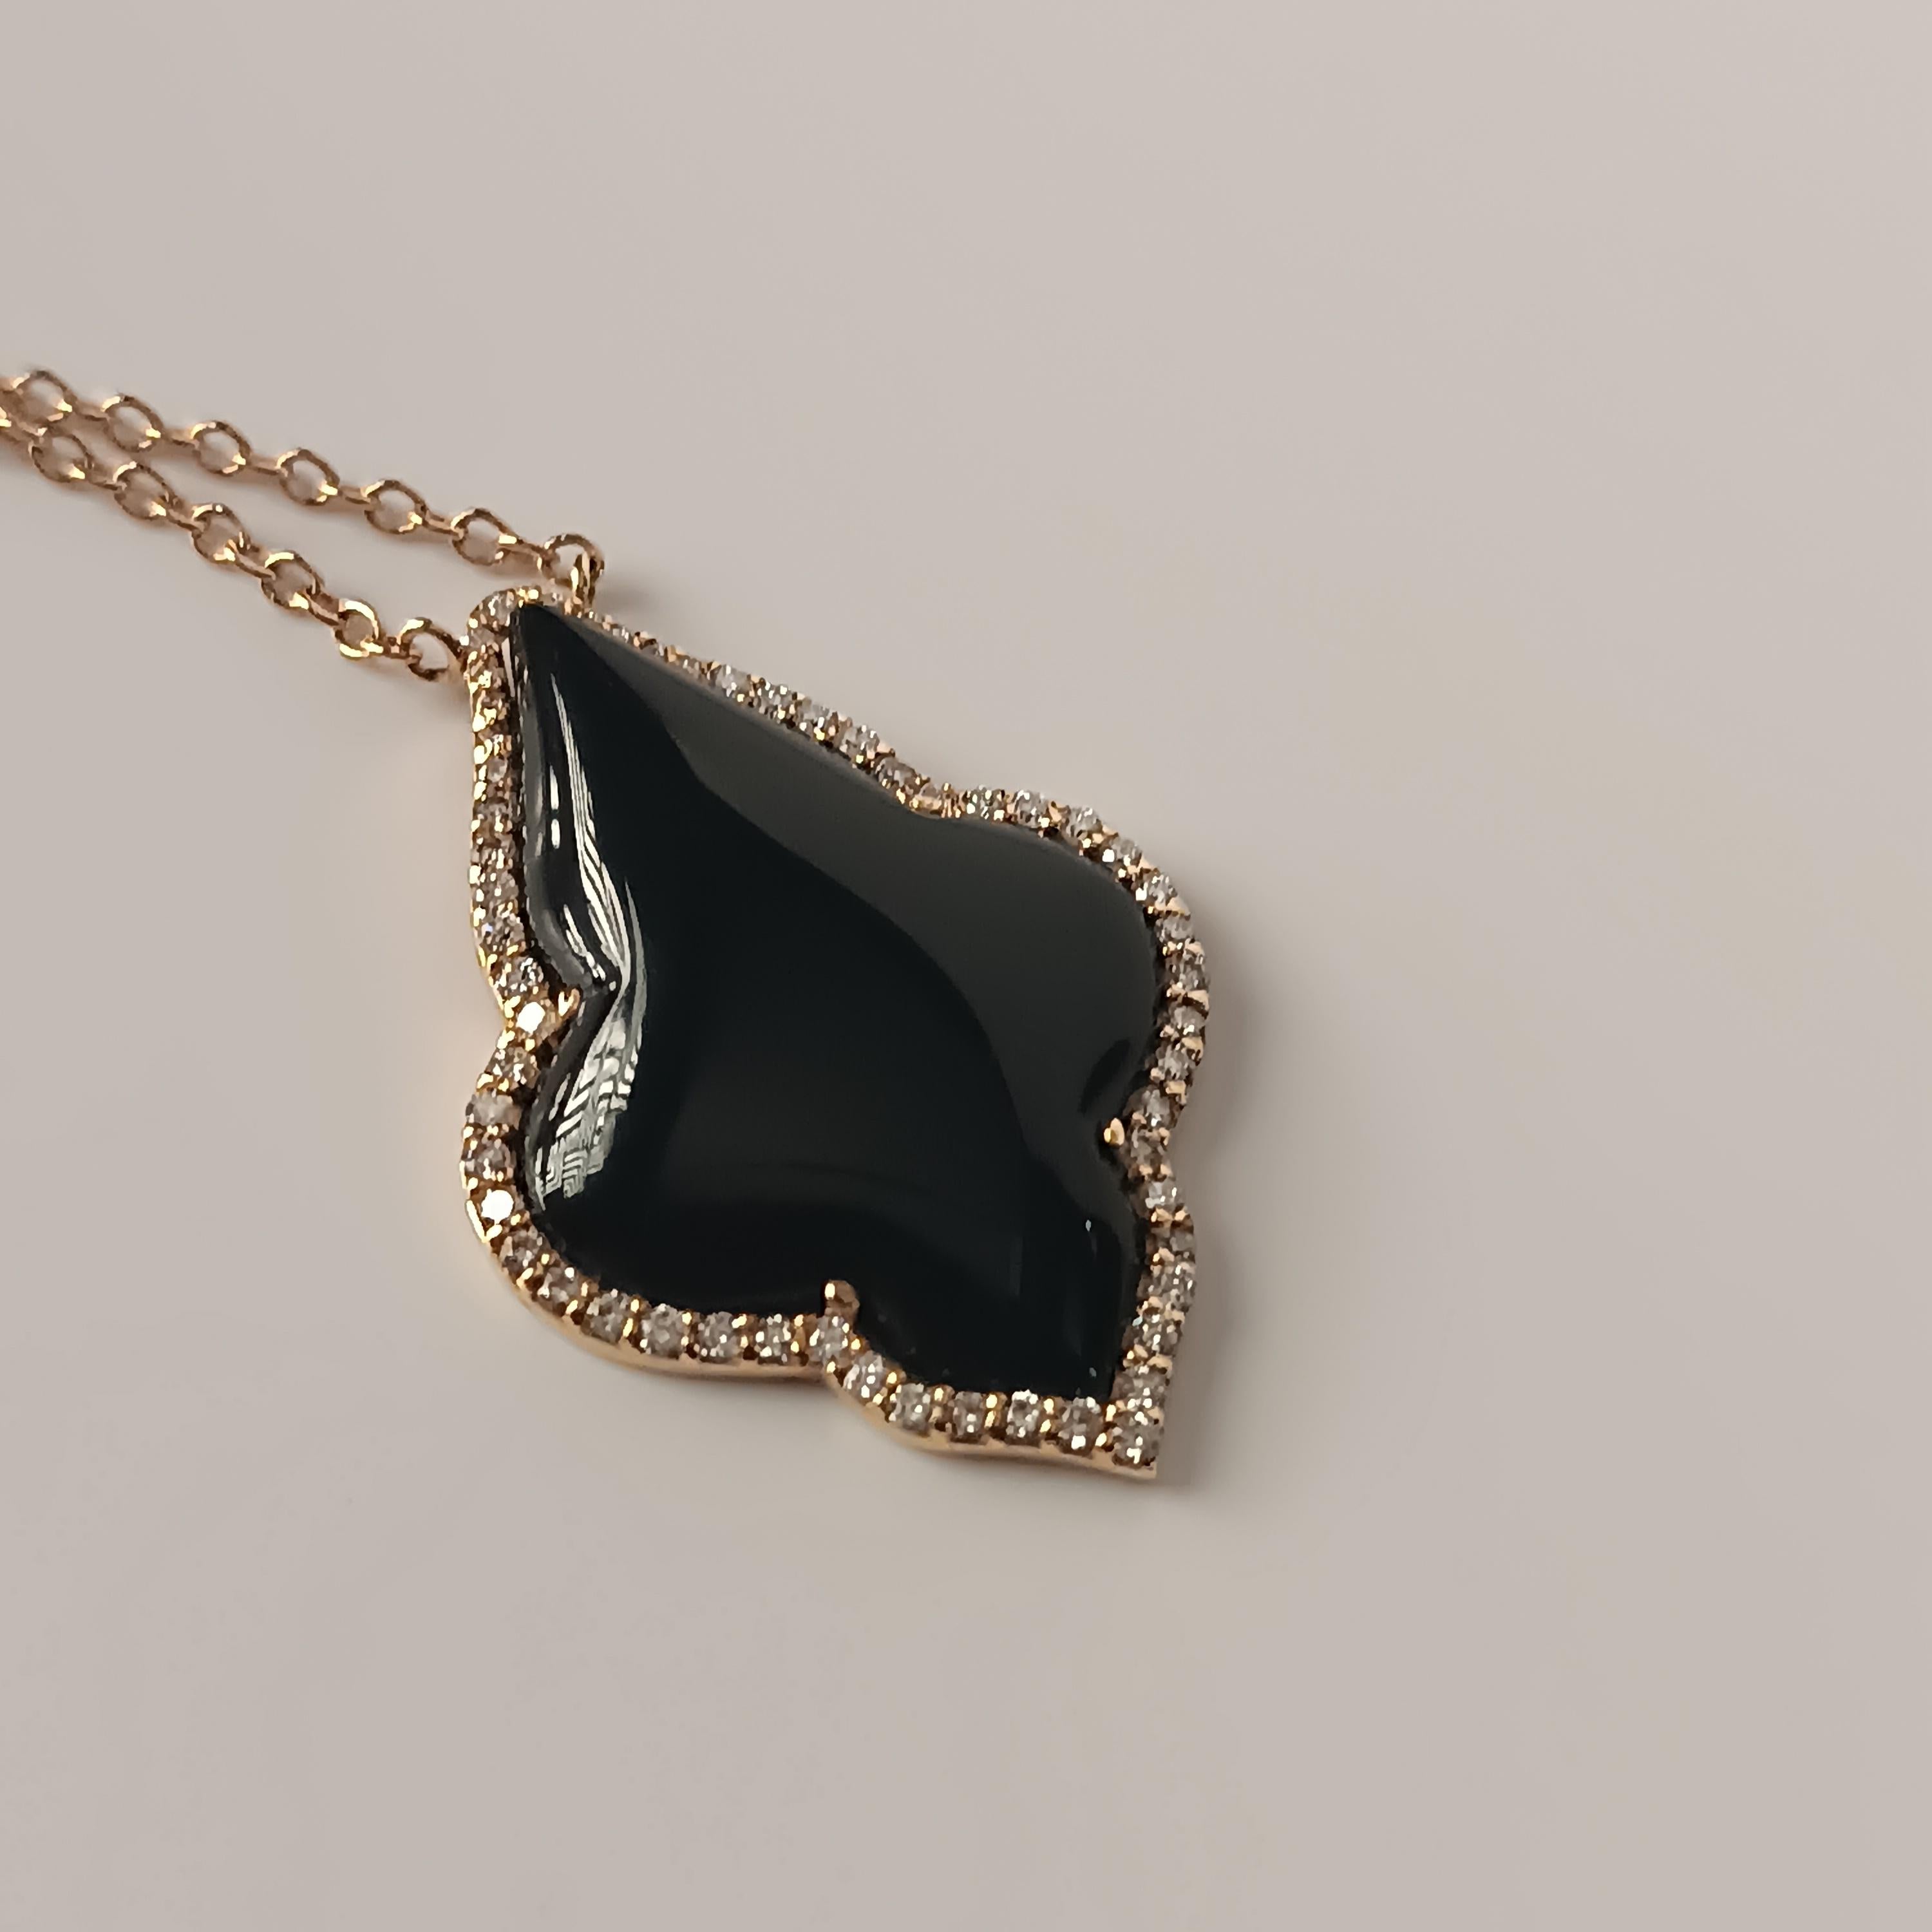 This wonderful Leo Milano pendant from our Carrobbio collection shows in every detail a very complicate yet perfectly done workmanship. The pendant and the chain are in 18 carat rose gold with onyx . The object weights 8,85 grams the total diamonds 